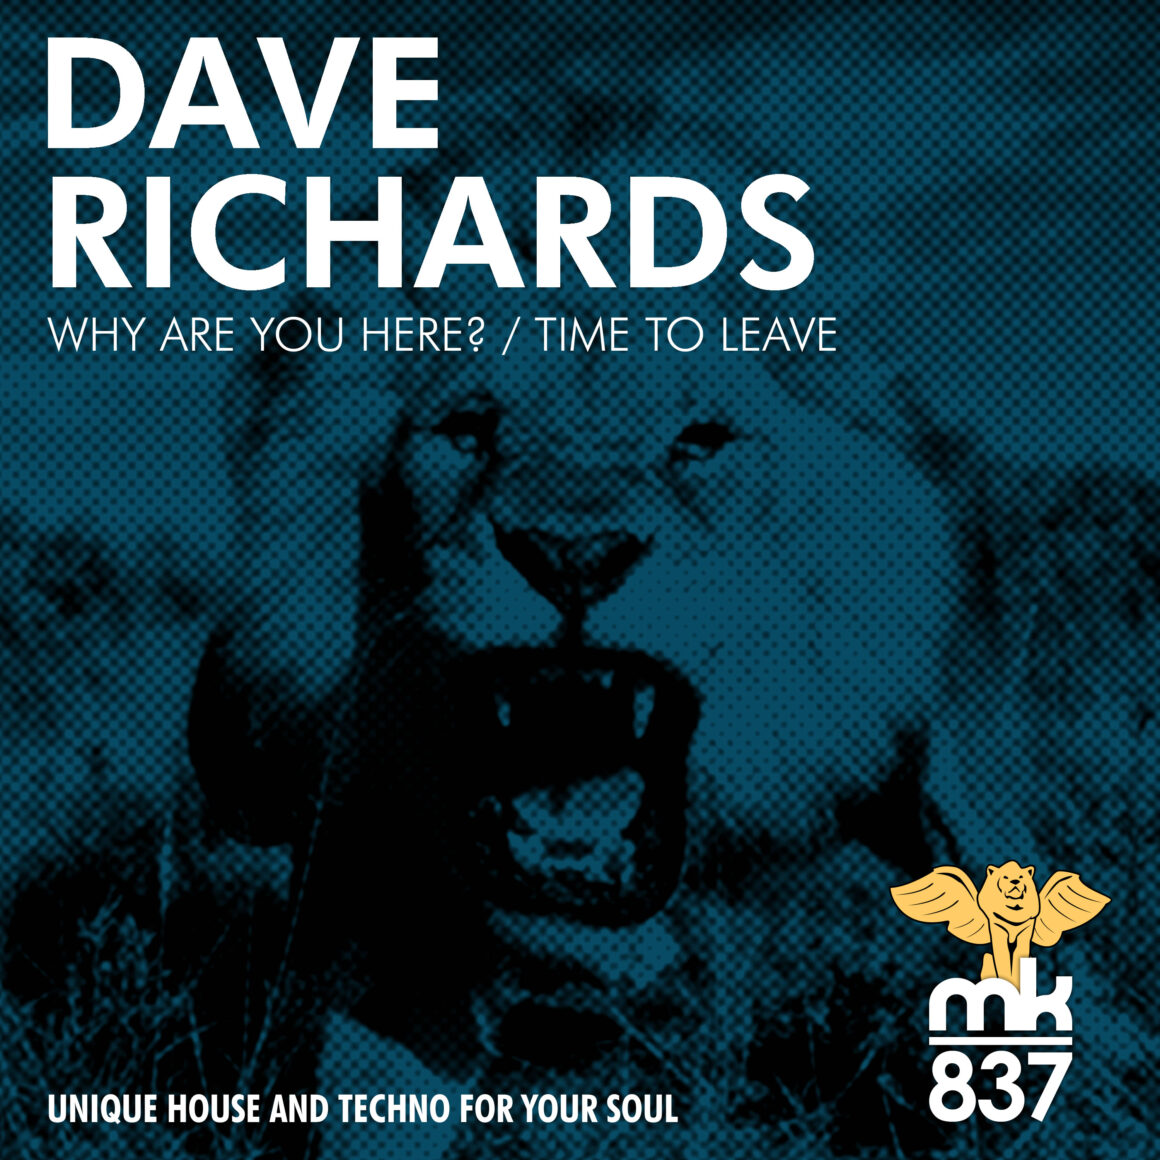 Dave Richards - Why Are You Here?